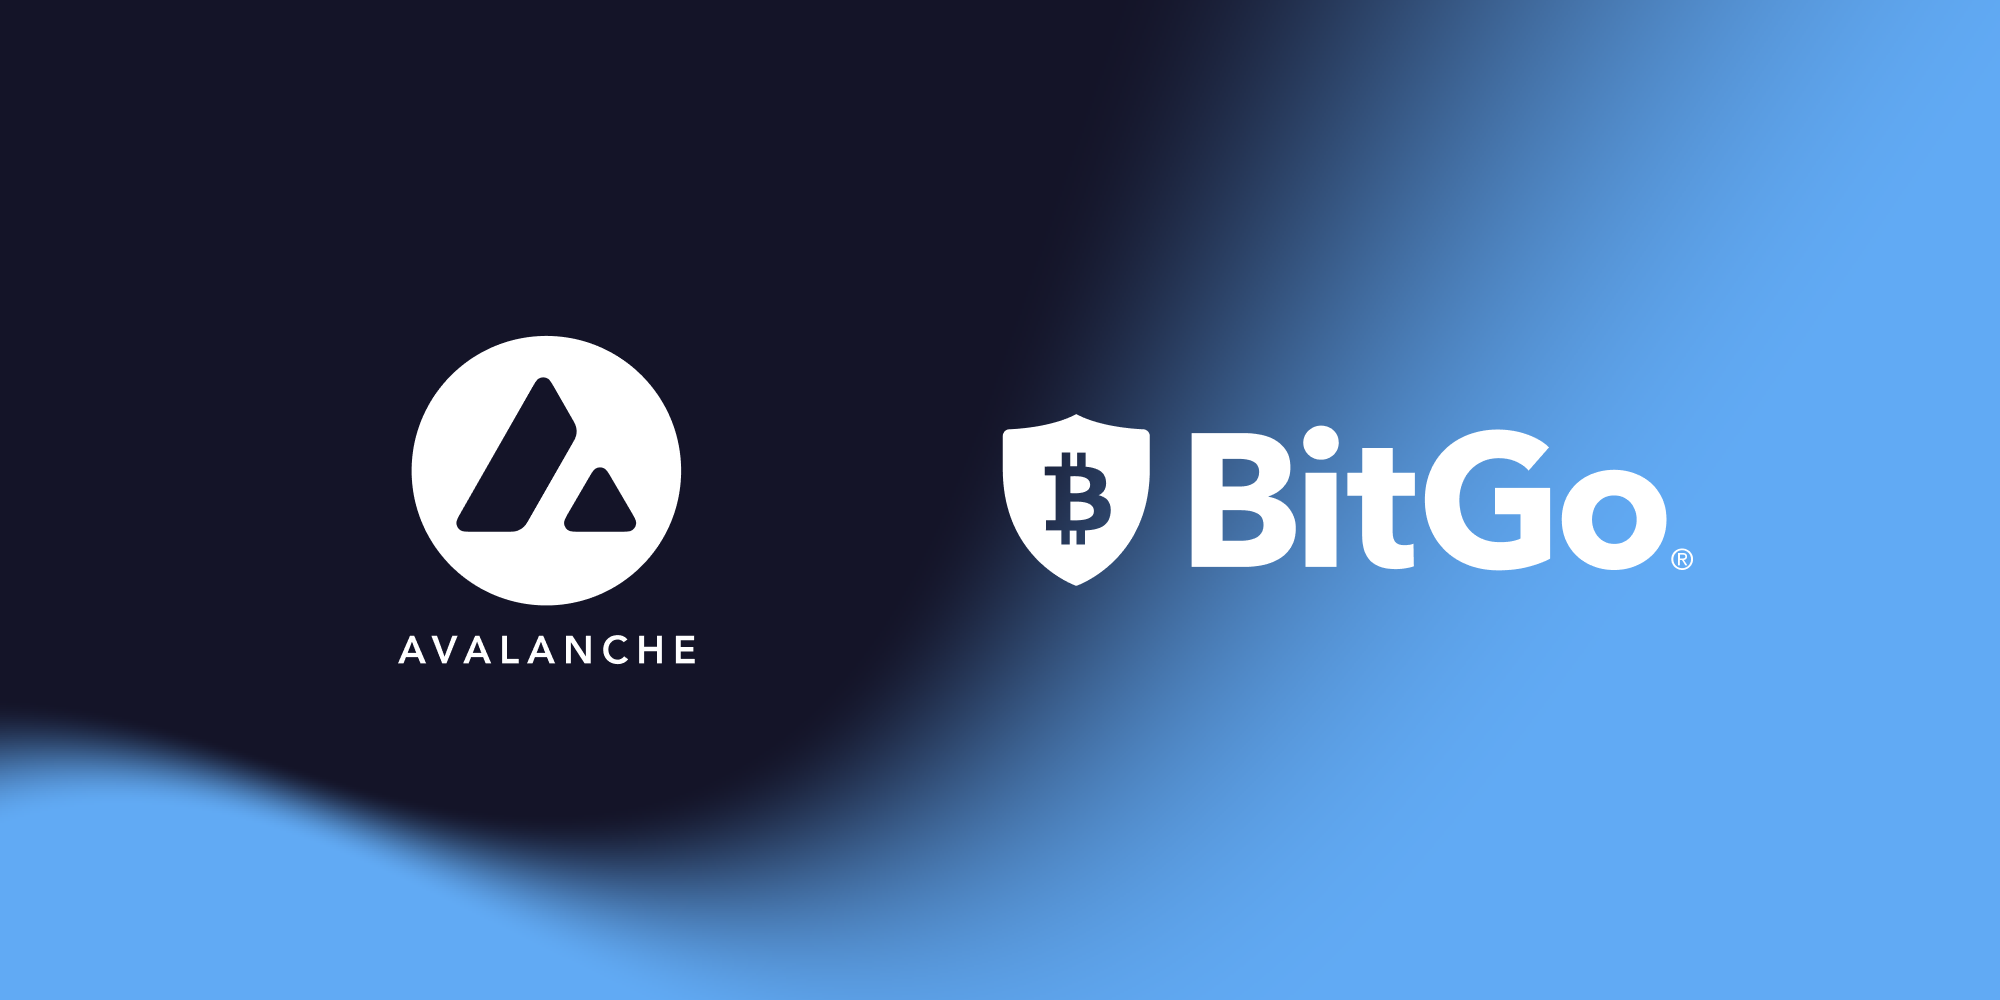 BitGo Announces Support For AVAX Amidst Growing Institutional Interest